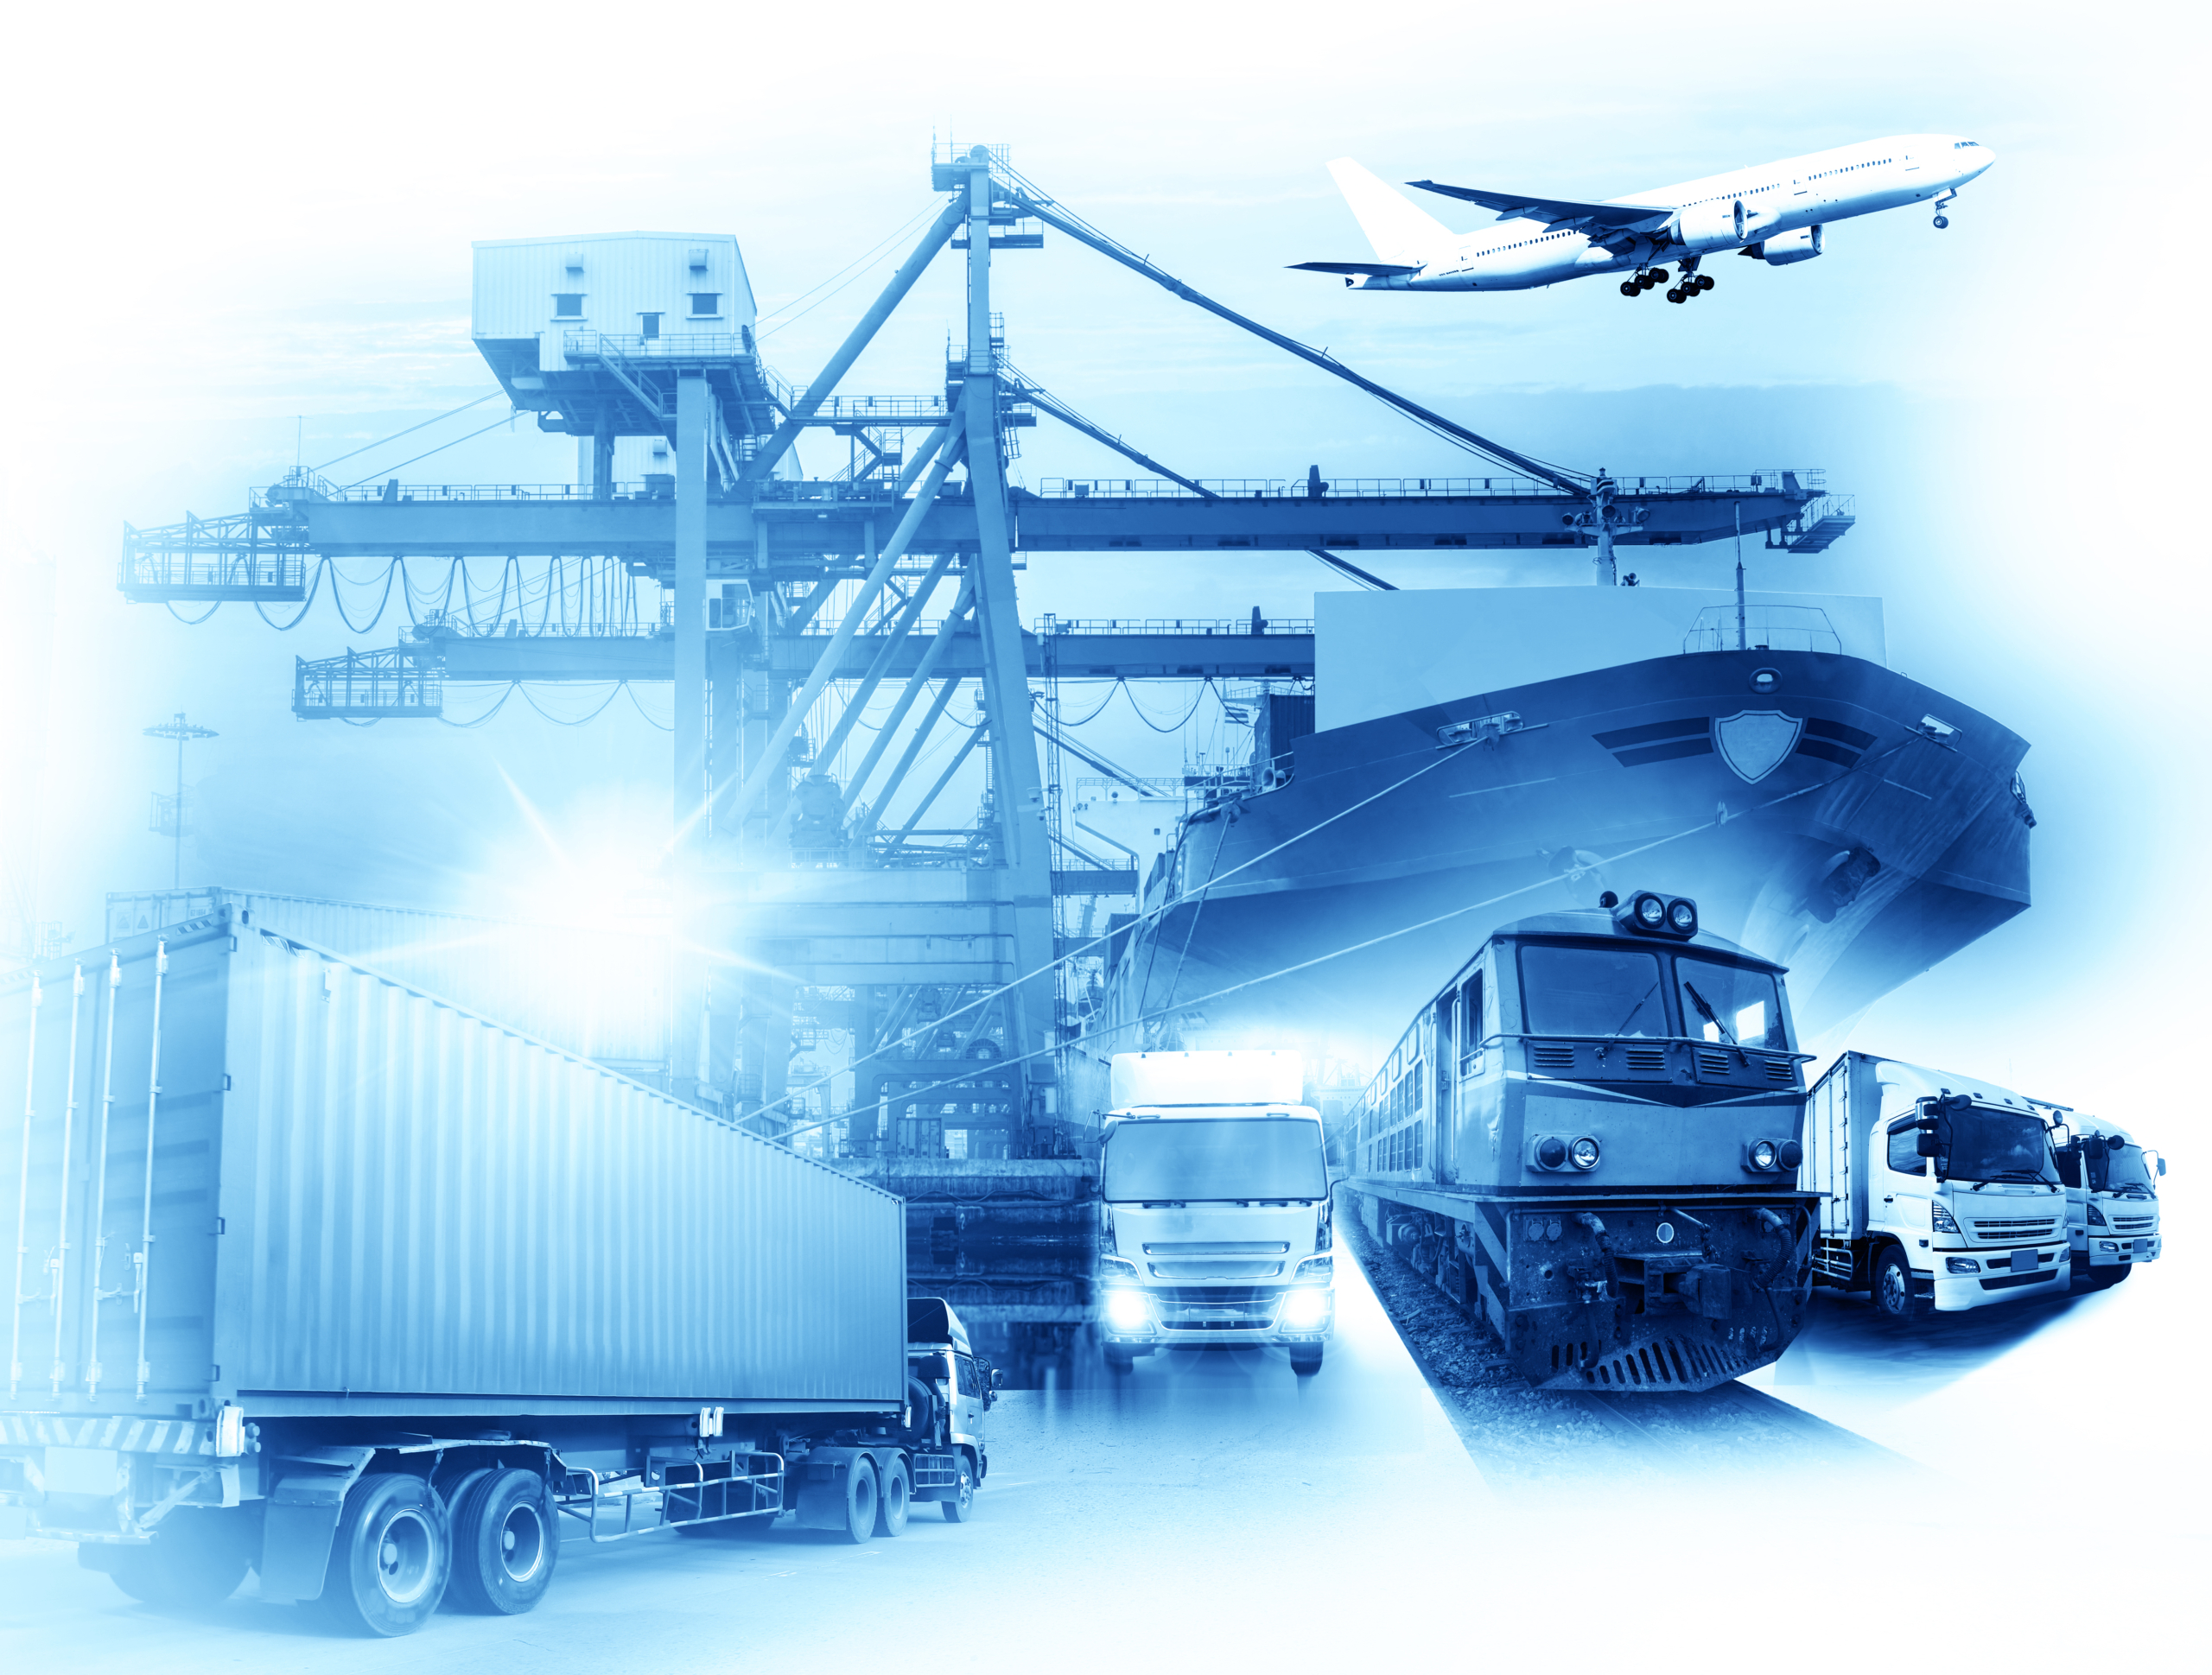 Global business of Container Cargo freight train for Business logistics concept, Air cargo trucking, Rail transportation and maritime shipping, distribution, delivery, service, shipping, import export